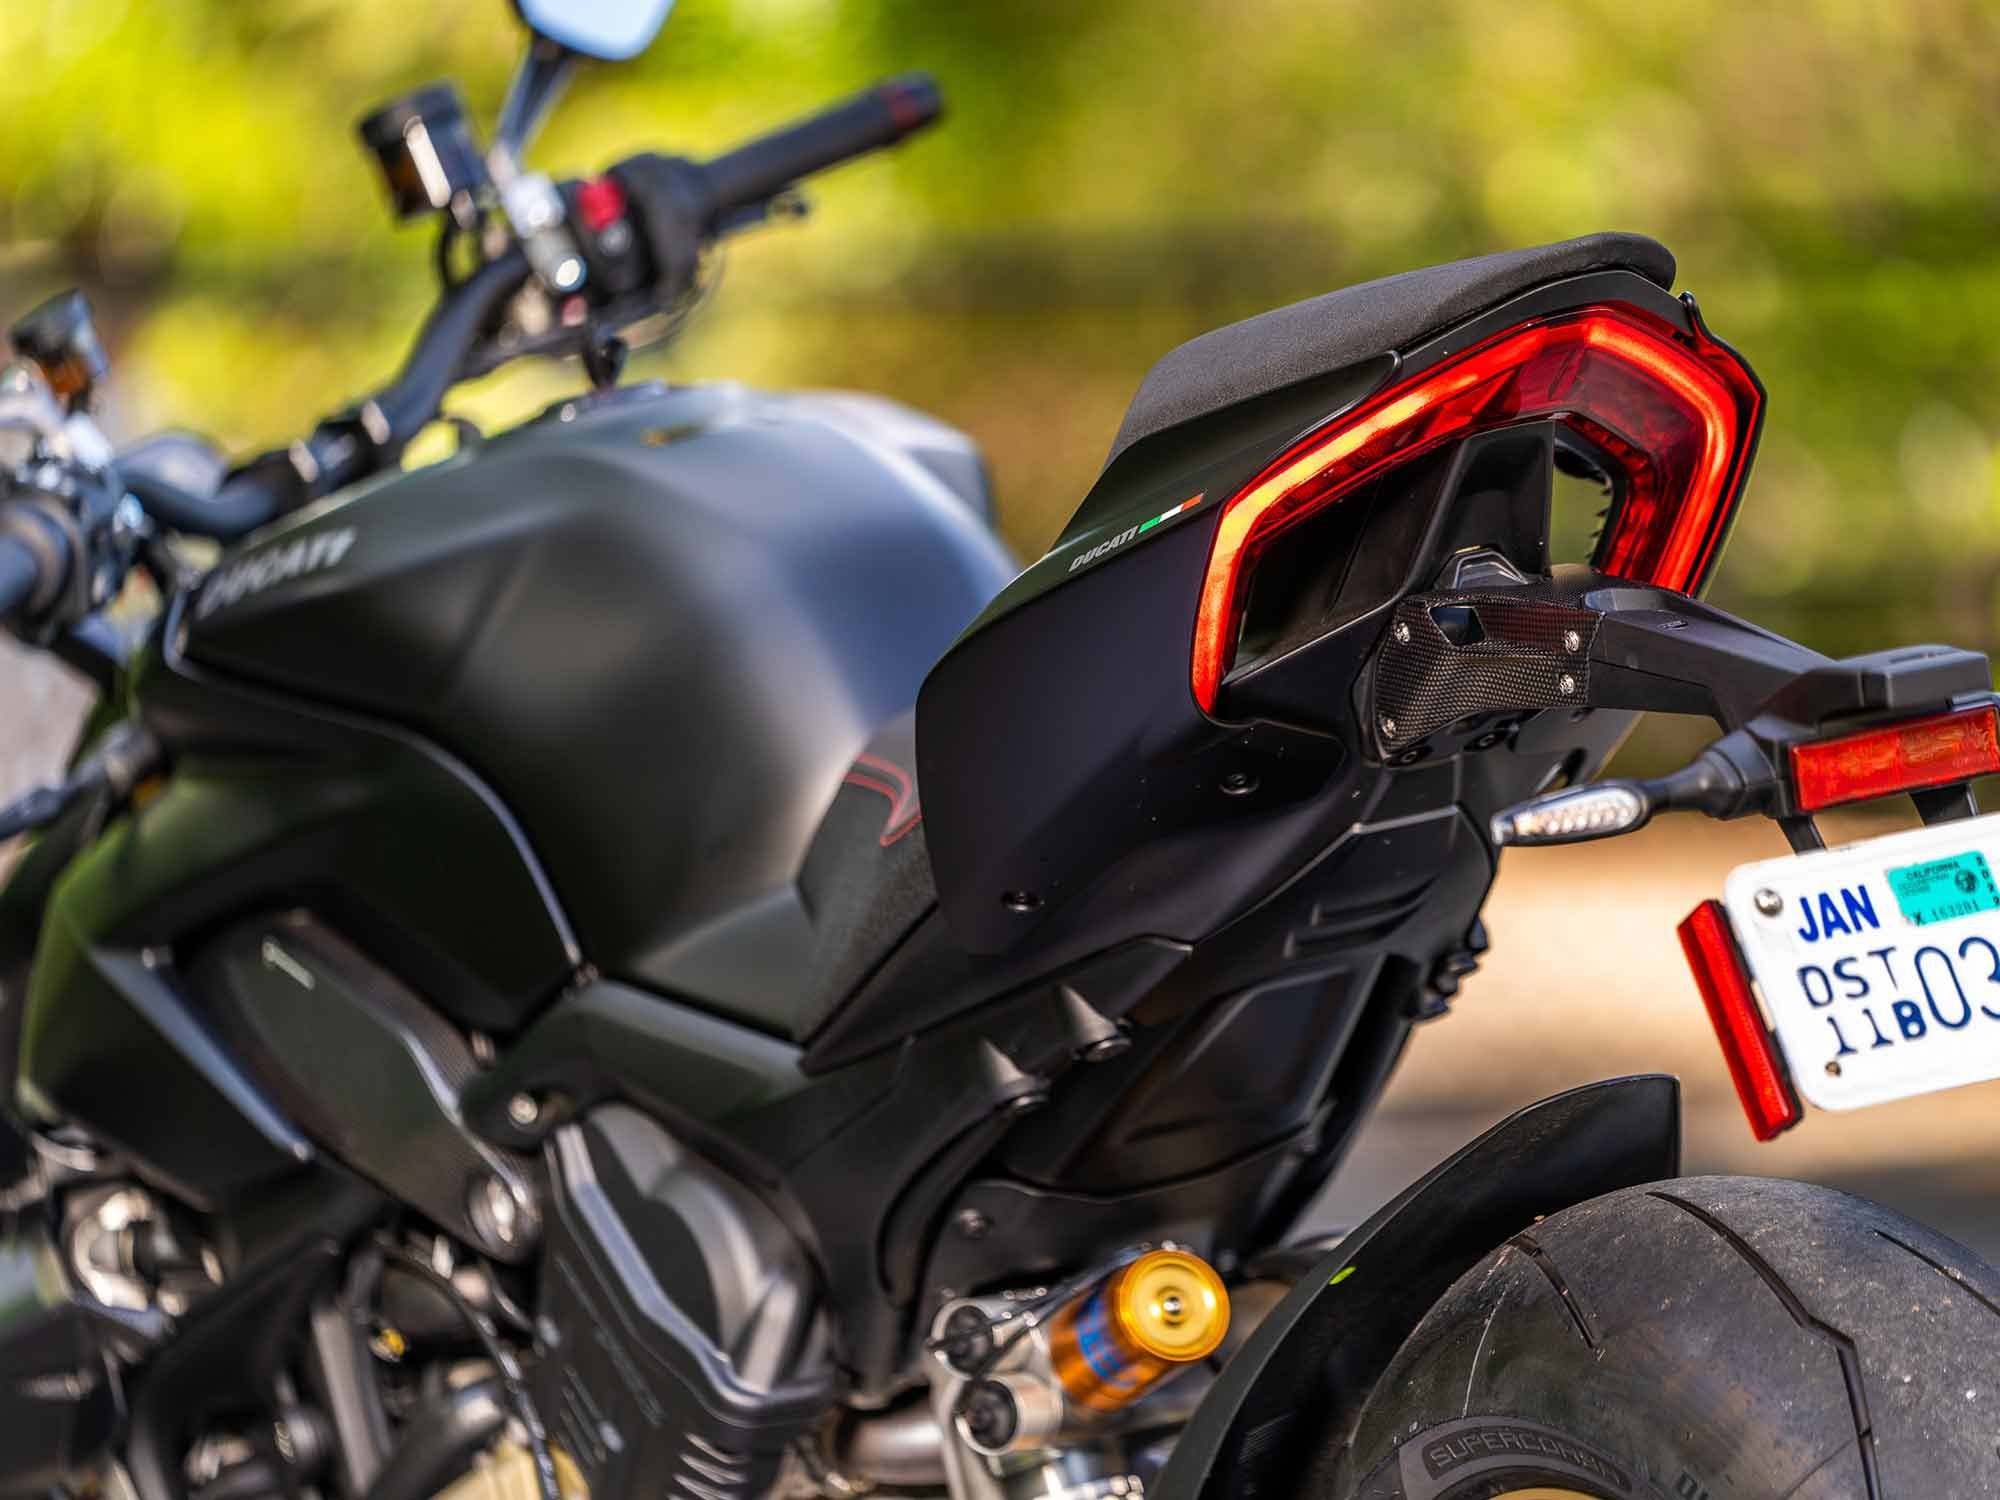 Ducati Performance accessories add tasteful touches to your Ducati motorcycle. We appreciate the precise fit and above average build quality.